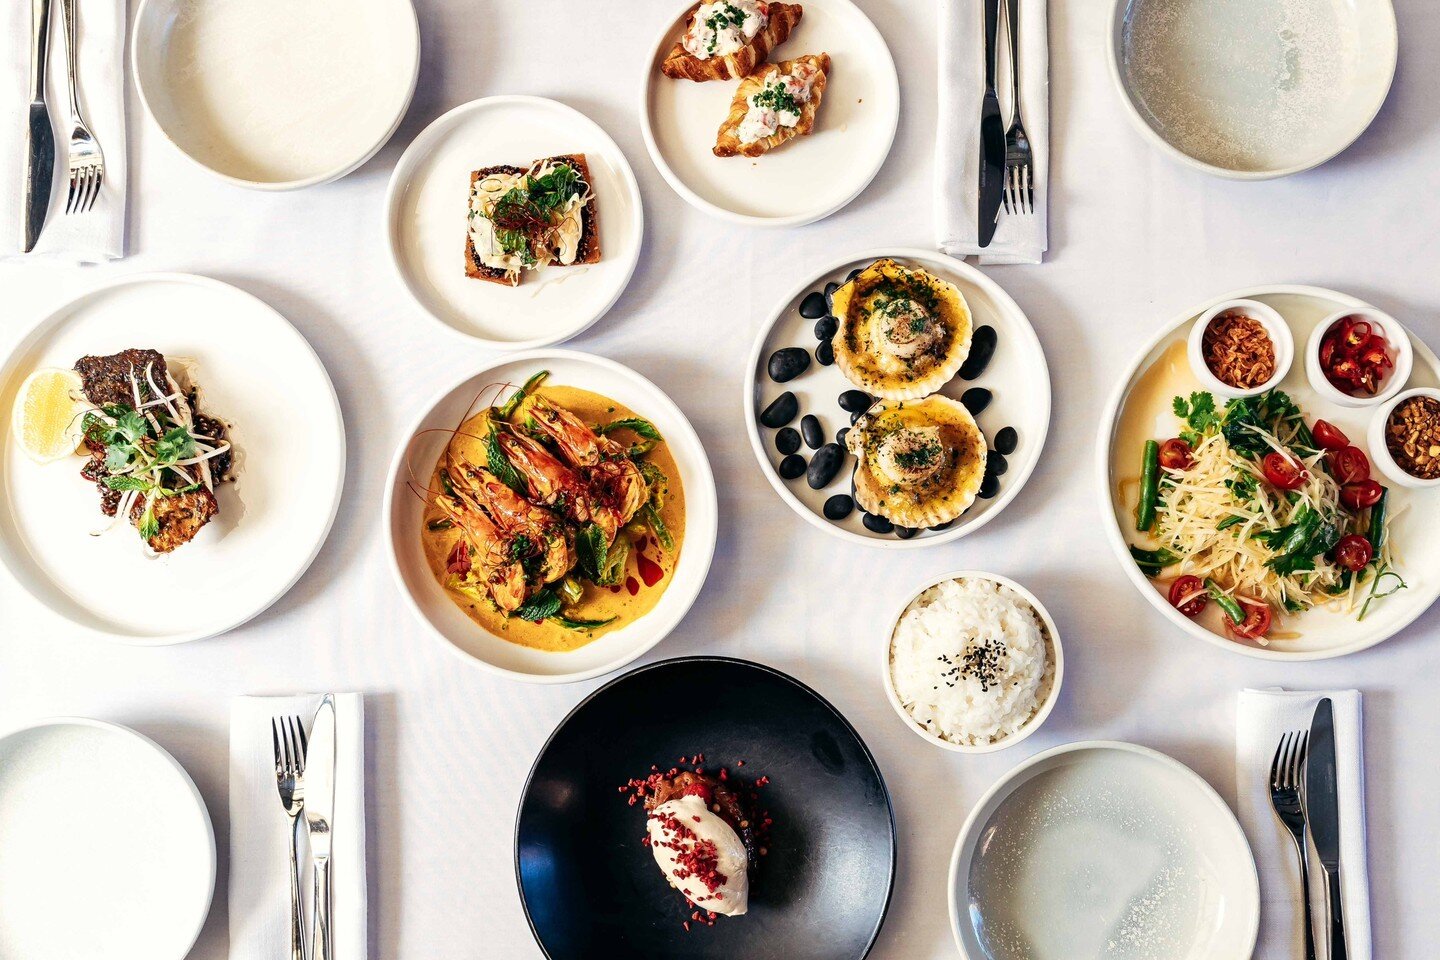 A Libertine Easter Feast awaits 

Join us this Easter Long Weekend and indulge in our special 7-course seafood banquet

$95pp

Call (07) 3367 3353 or book online at www.libertine.net.au
Located at The Barracks